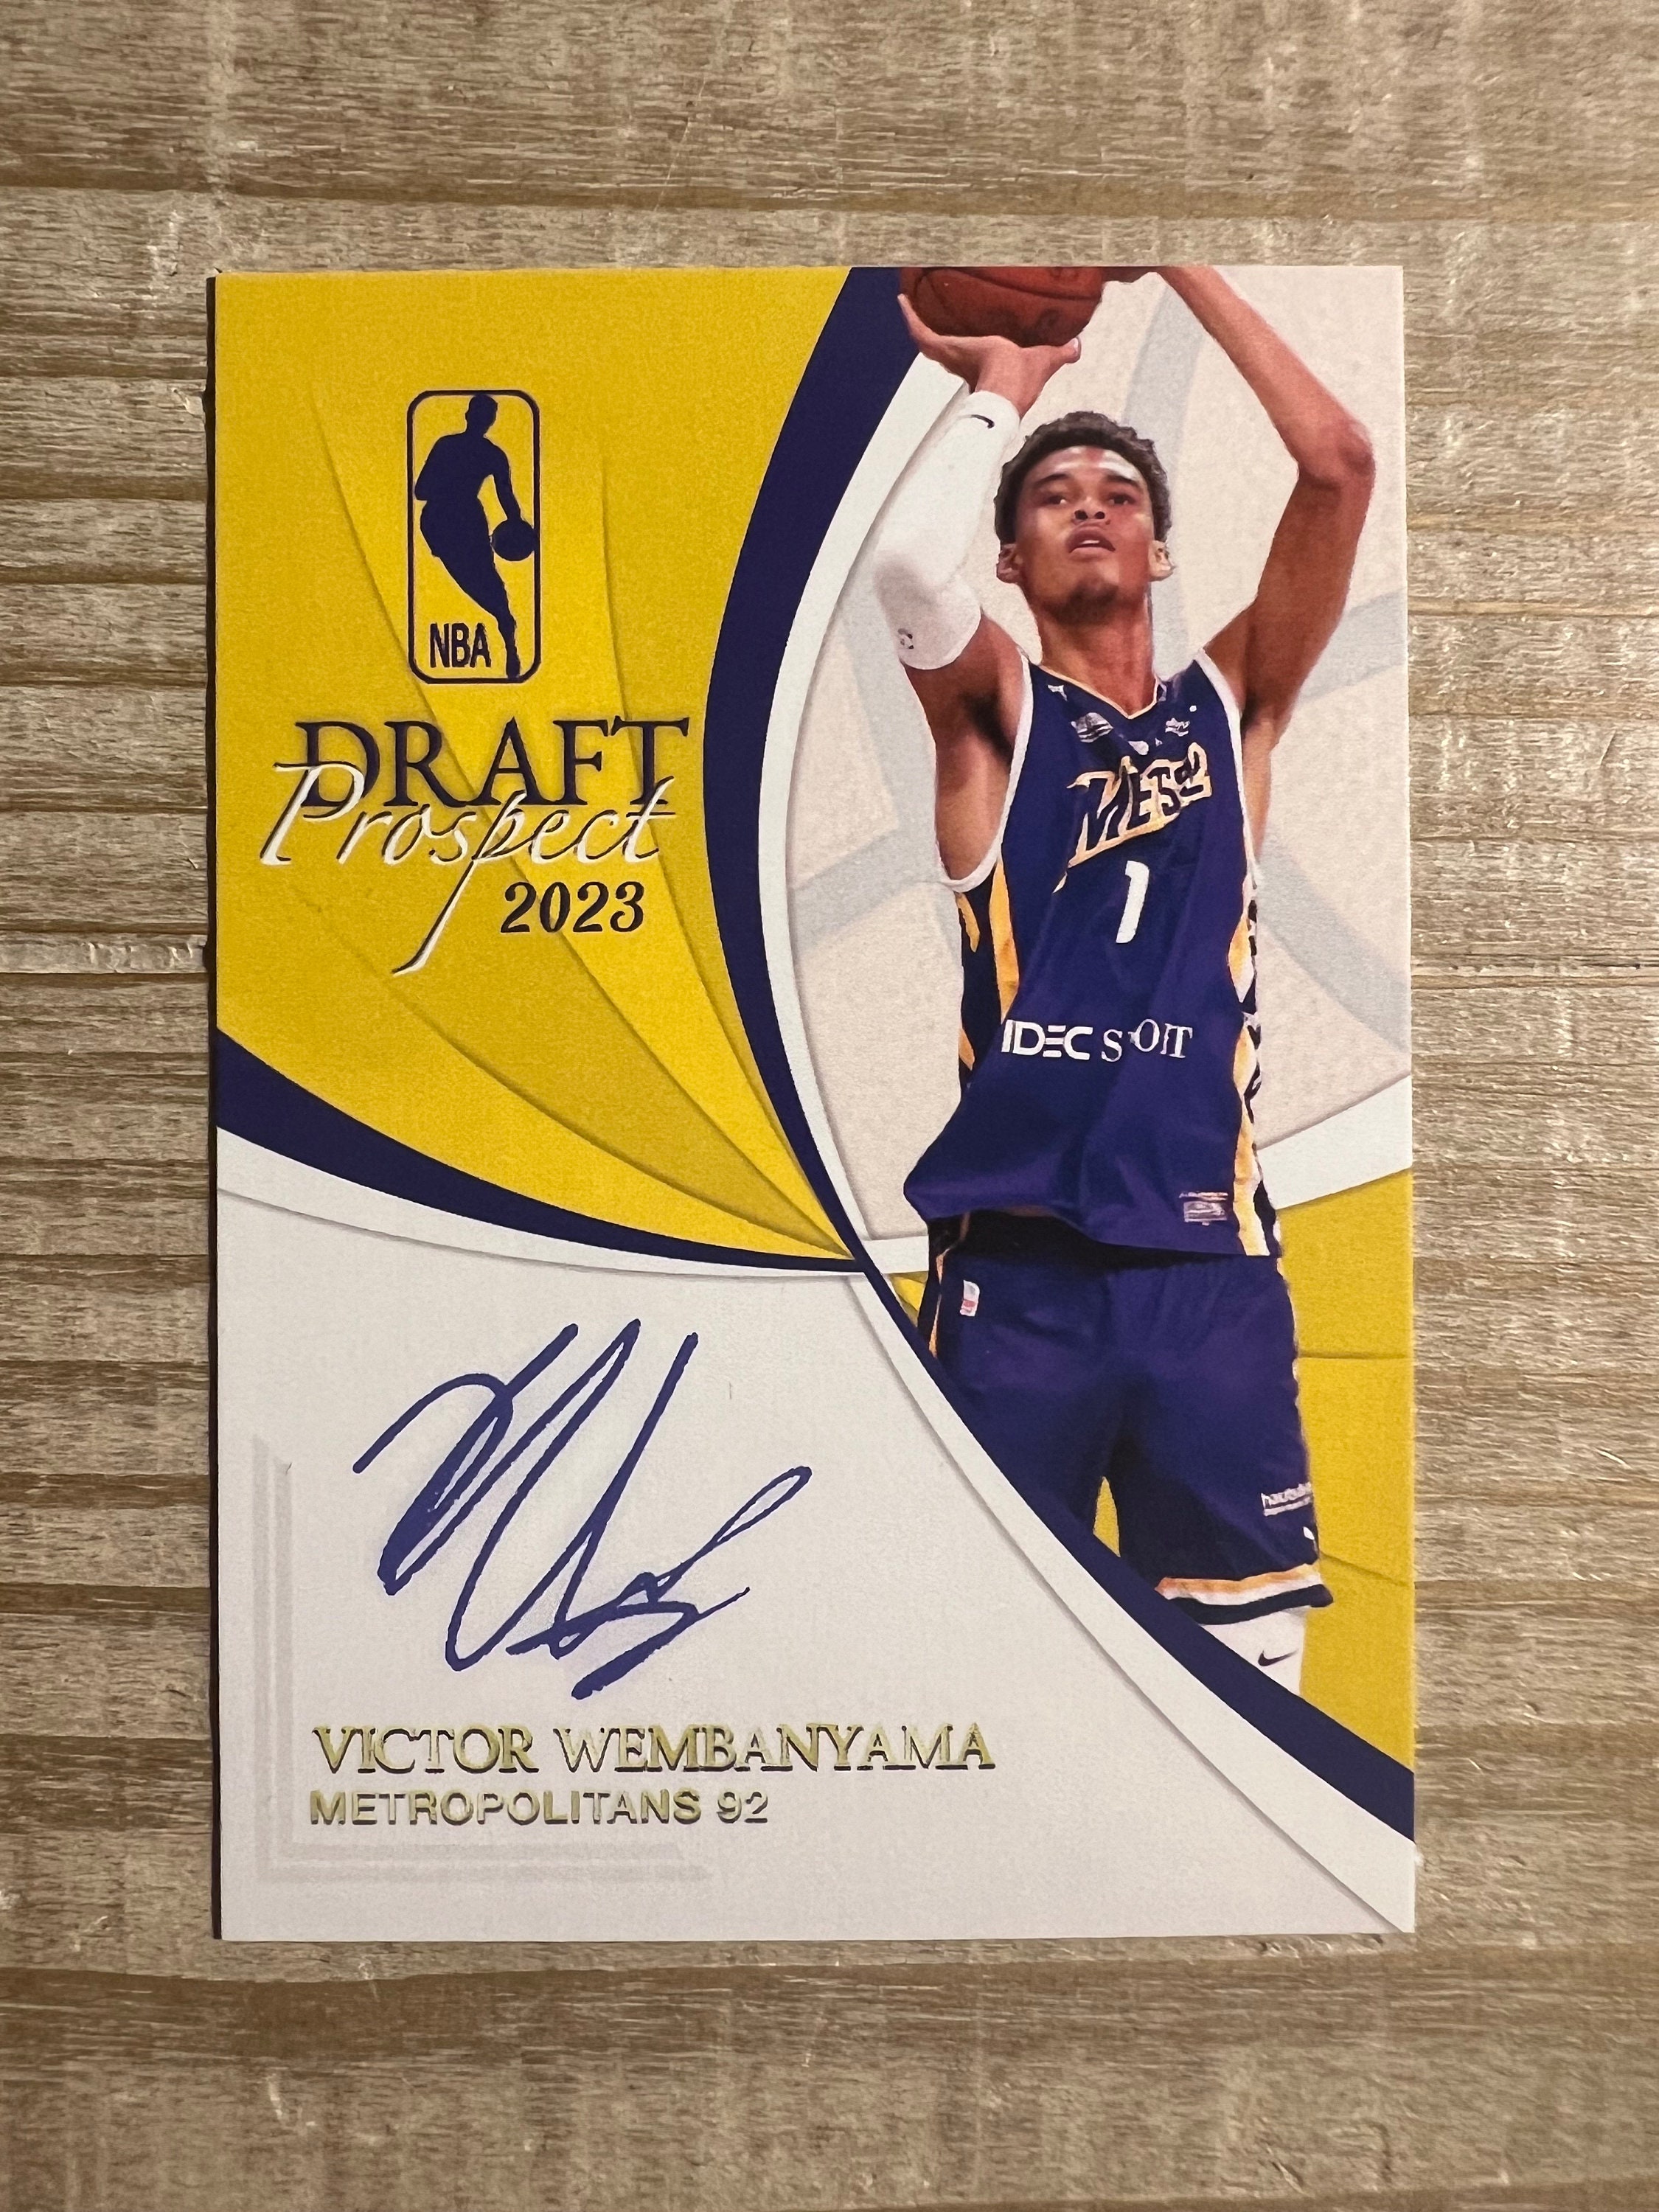 2019 VICTOR WEMBANYAMA Exclusive CUSTOM MADE Basketball Novelty Rookie  Cards Euro Cup and U16 France - Projected #1 Pick in 2023 NBA Draft